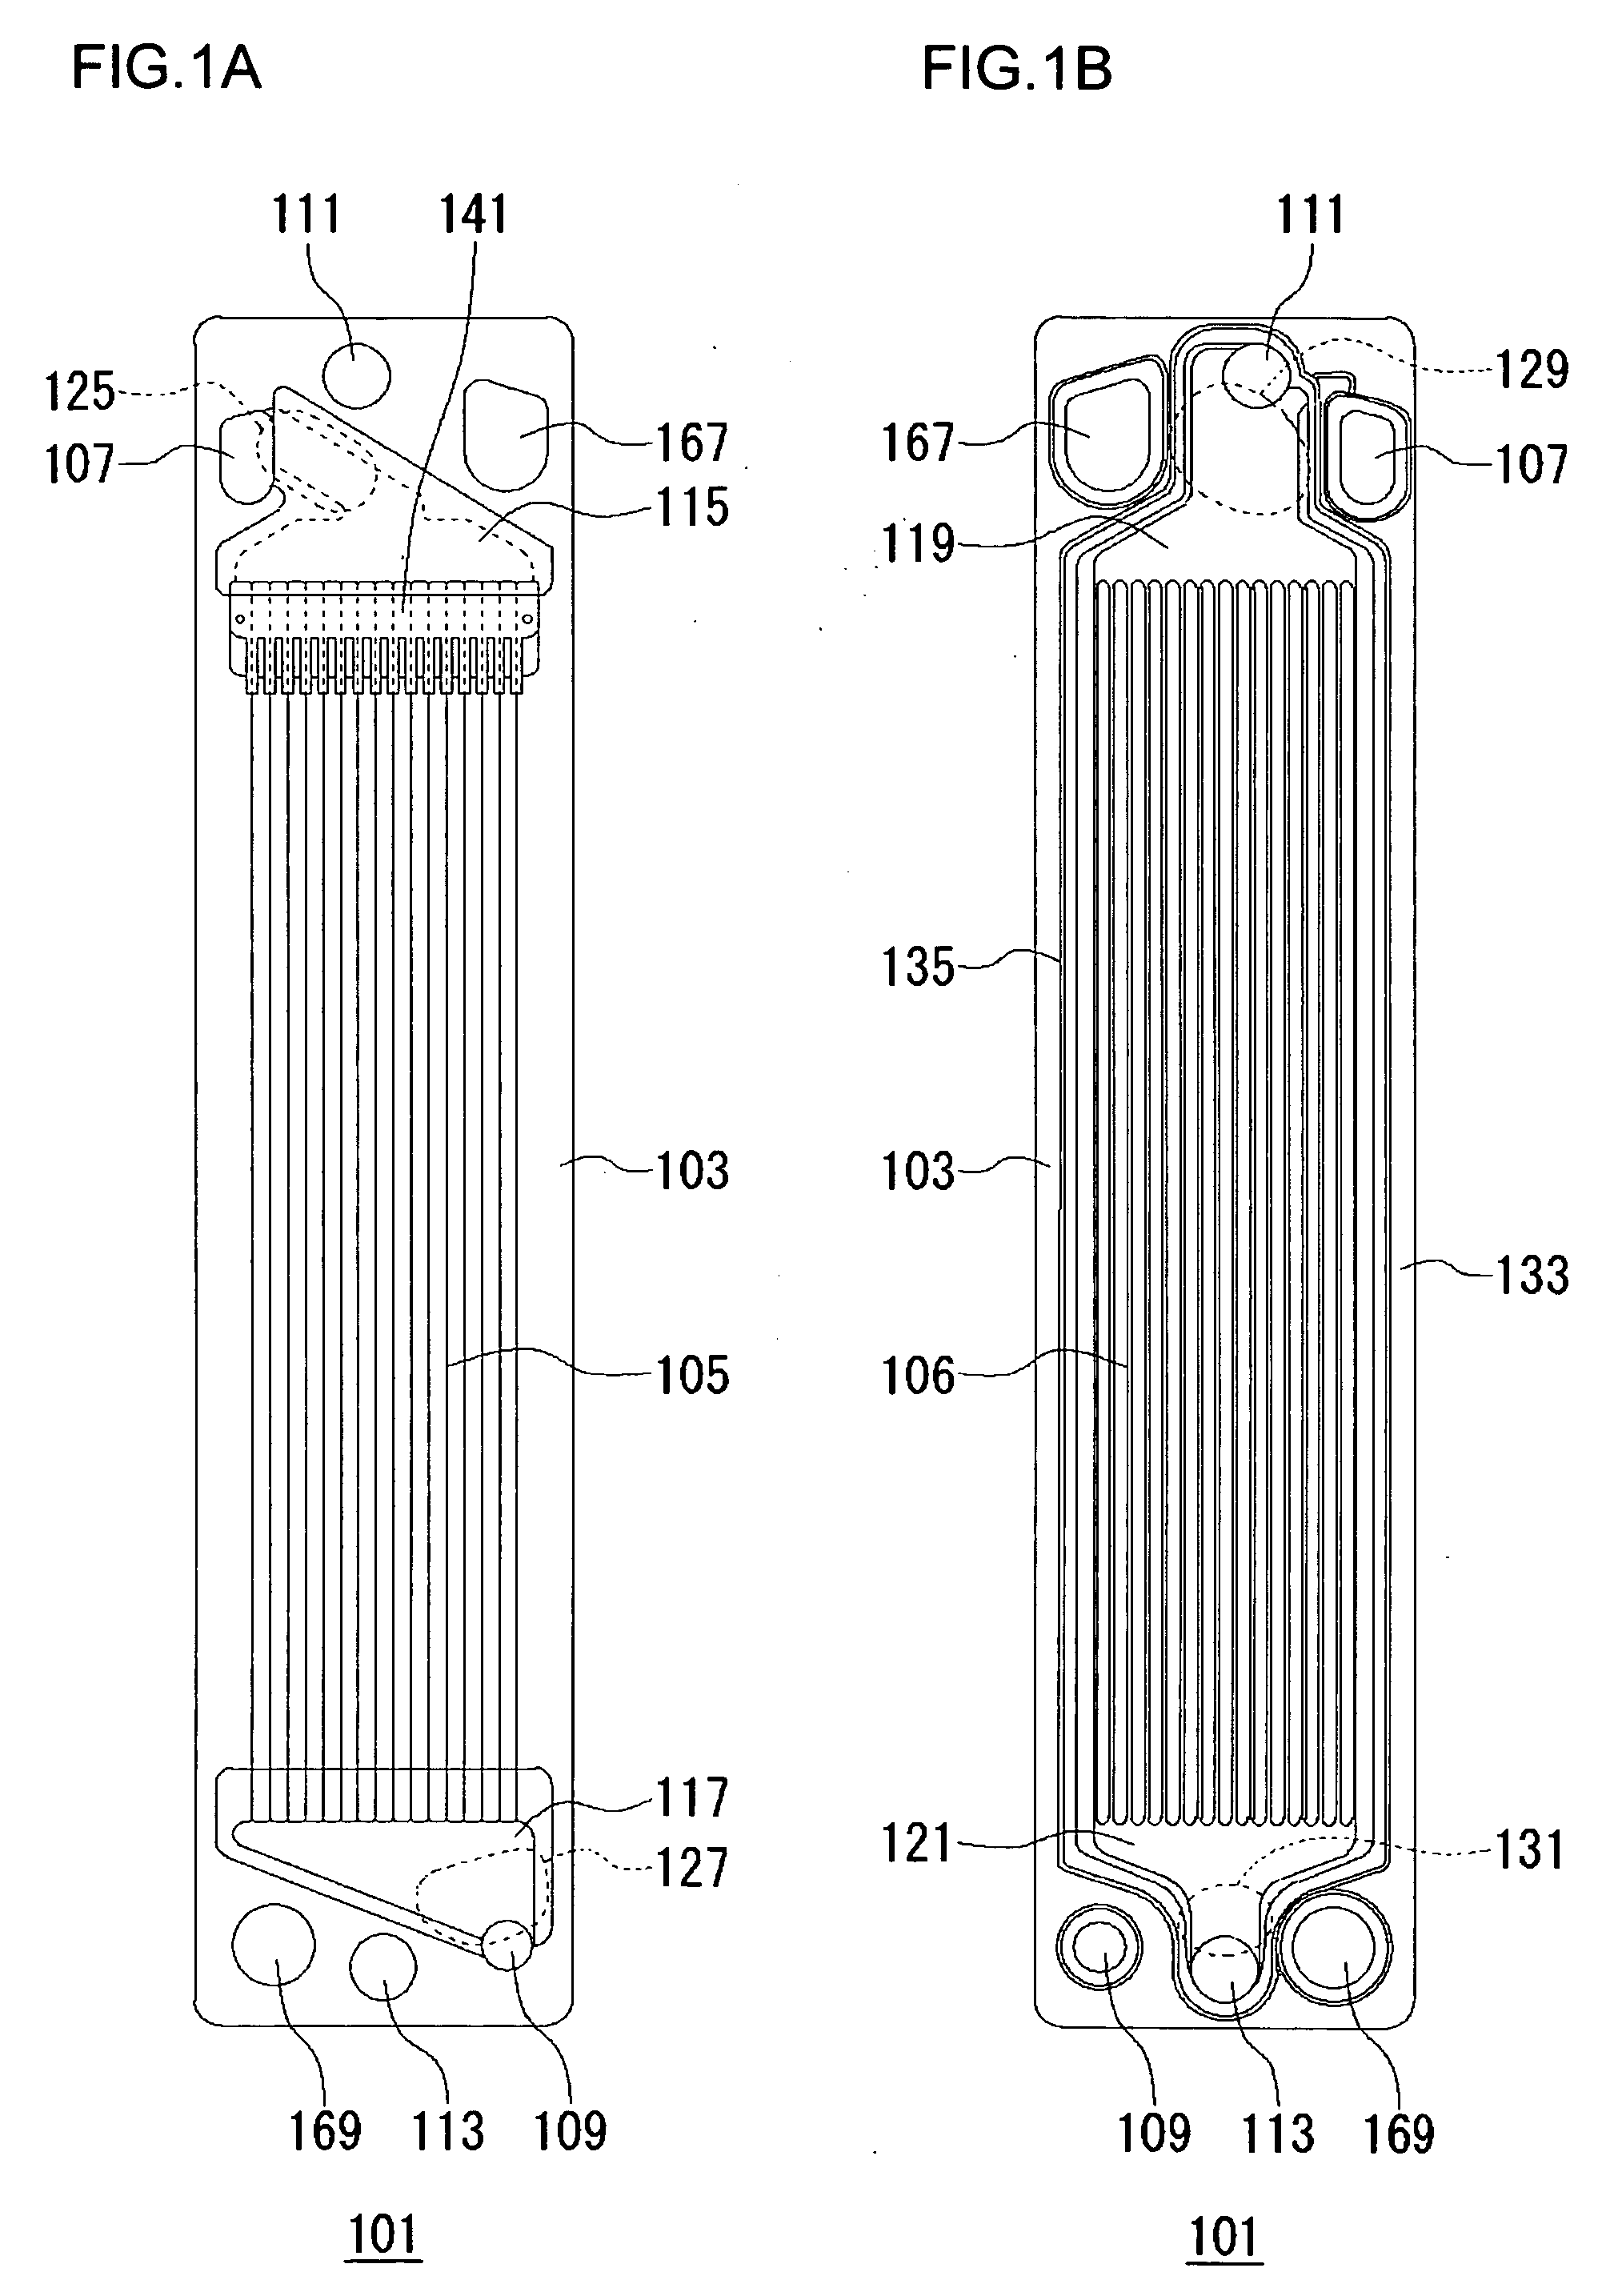 Fuel cell and fuel cell separator